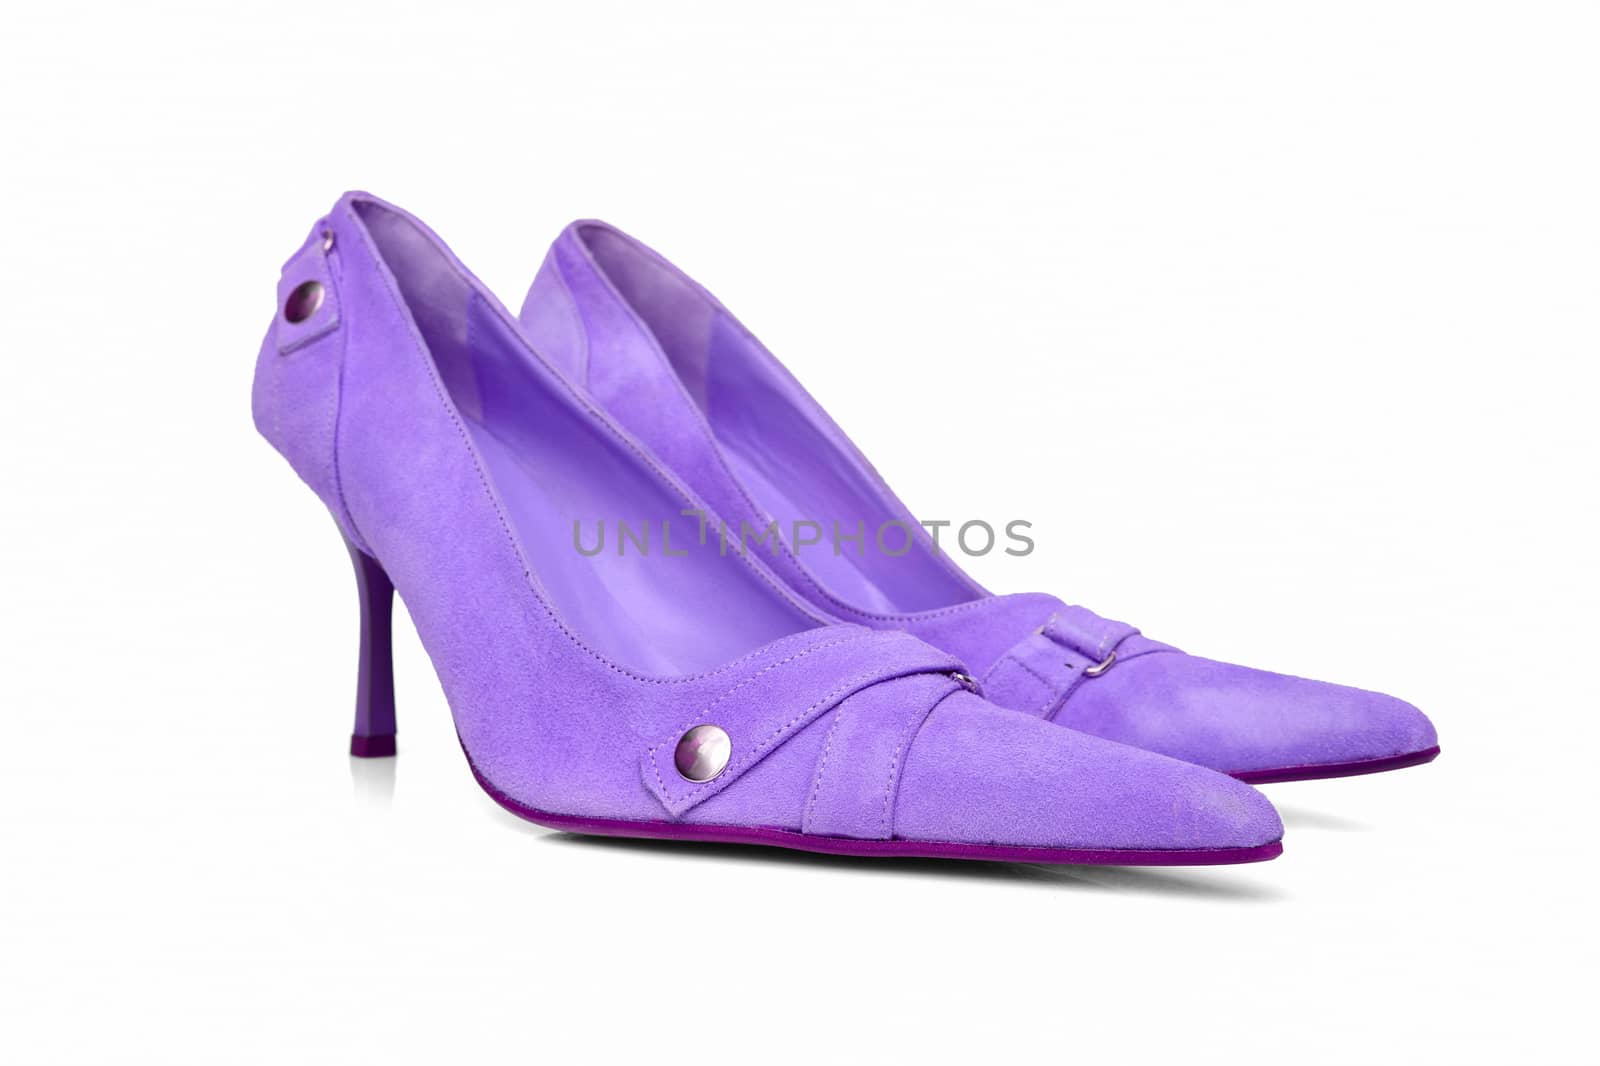 Female purple leather shoes on white background, isolated product. by GeorgeVieiraSilva